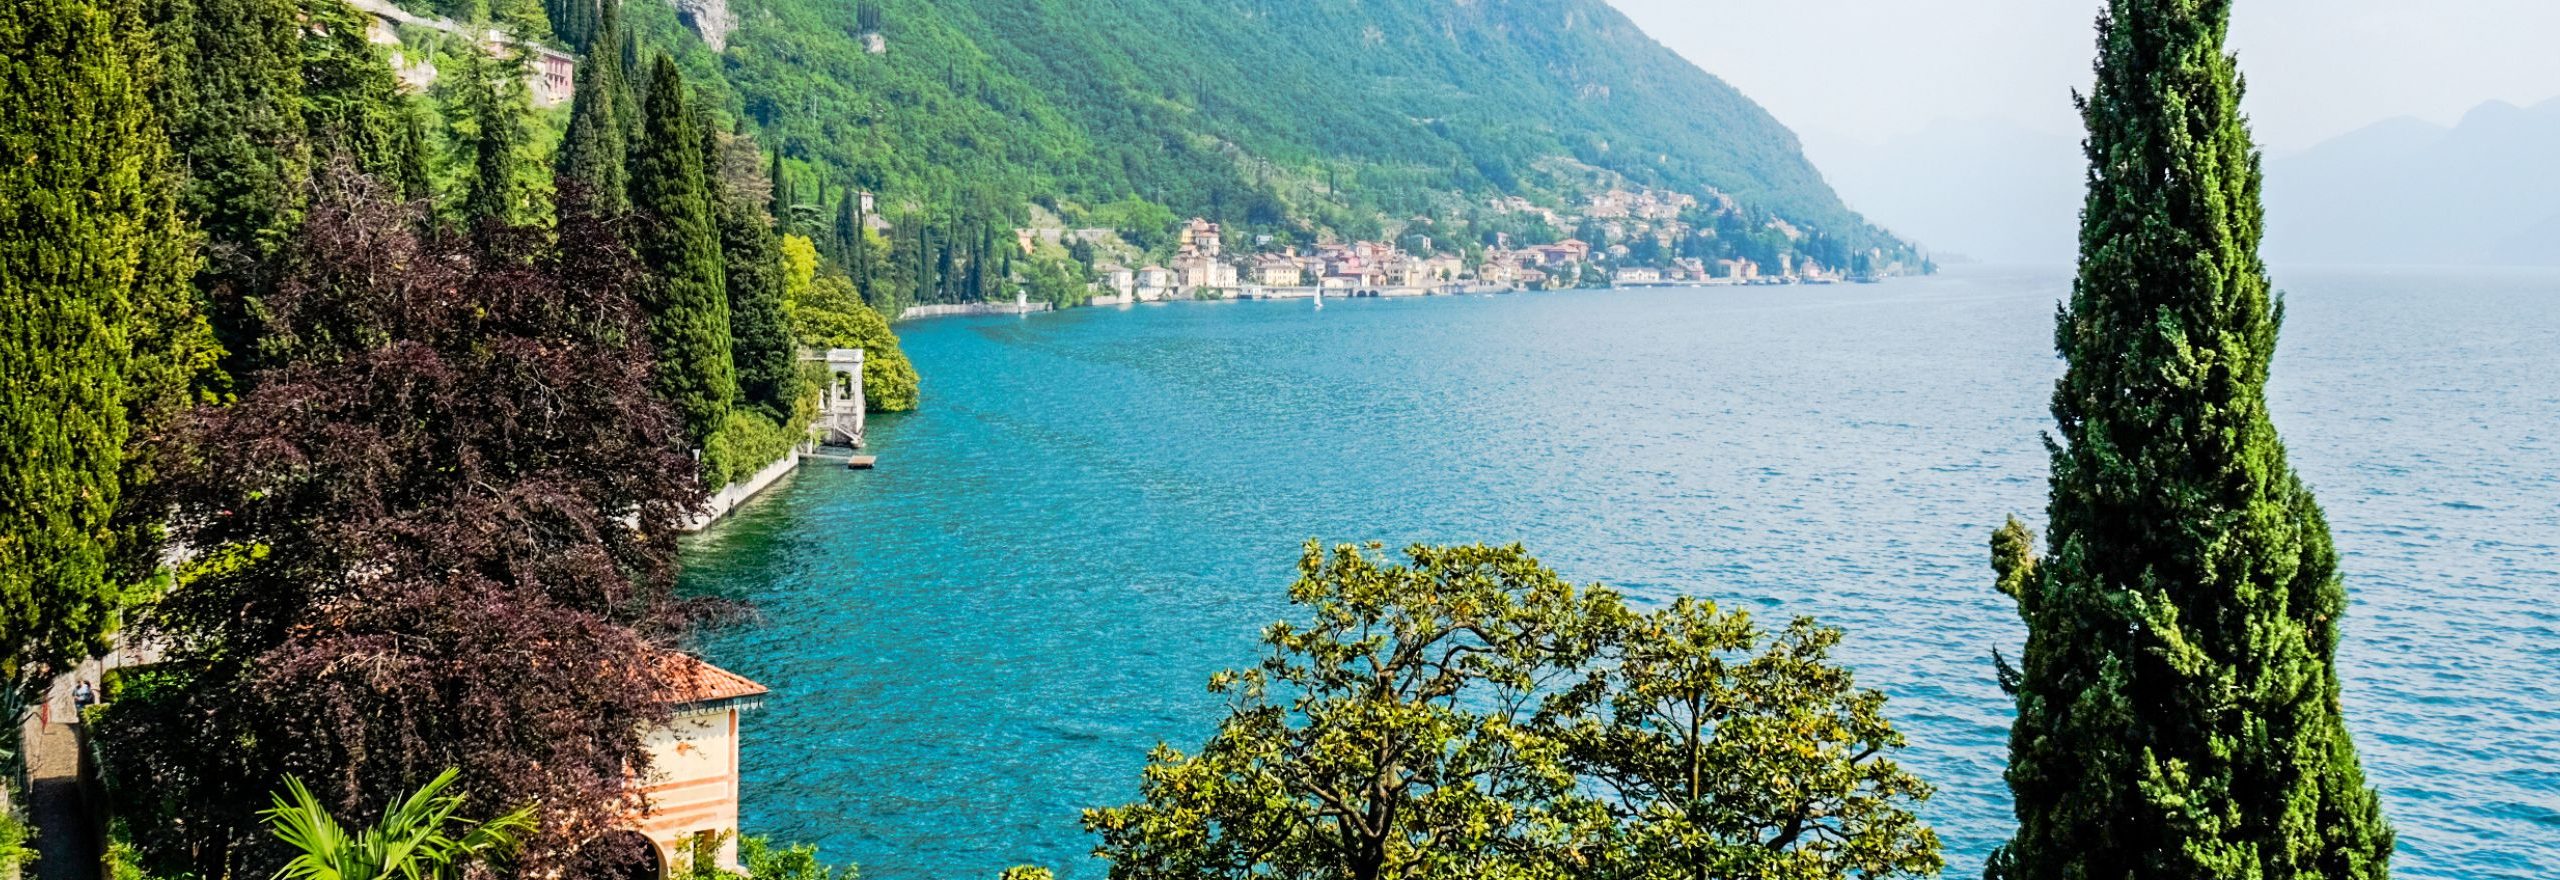 Cycling Italy's Lakes District